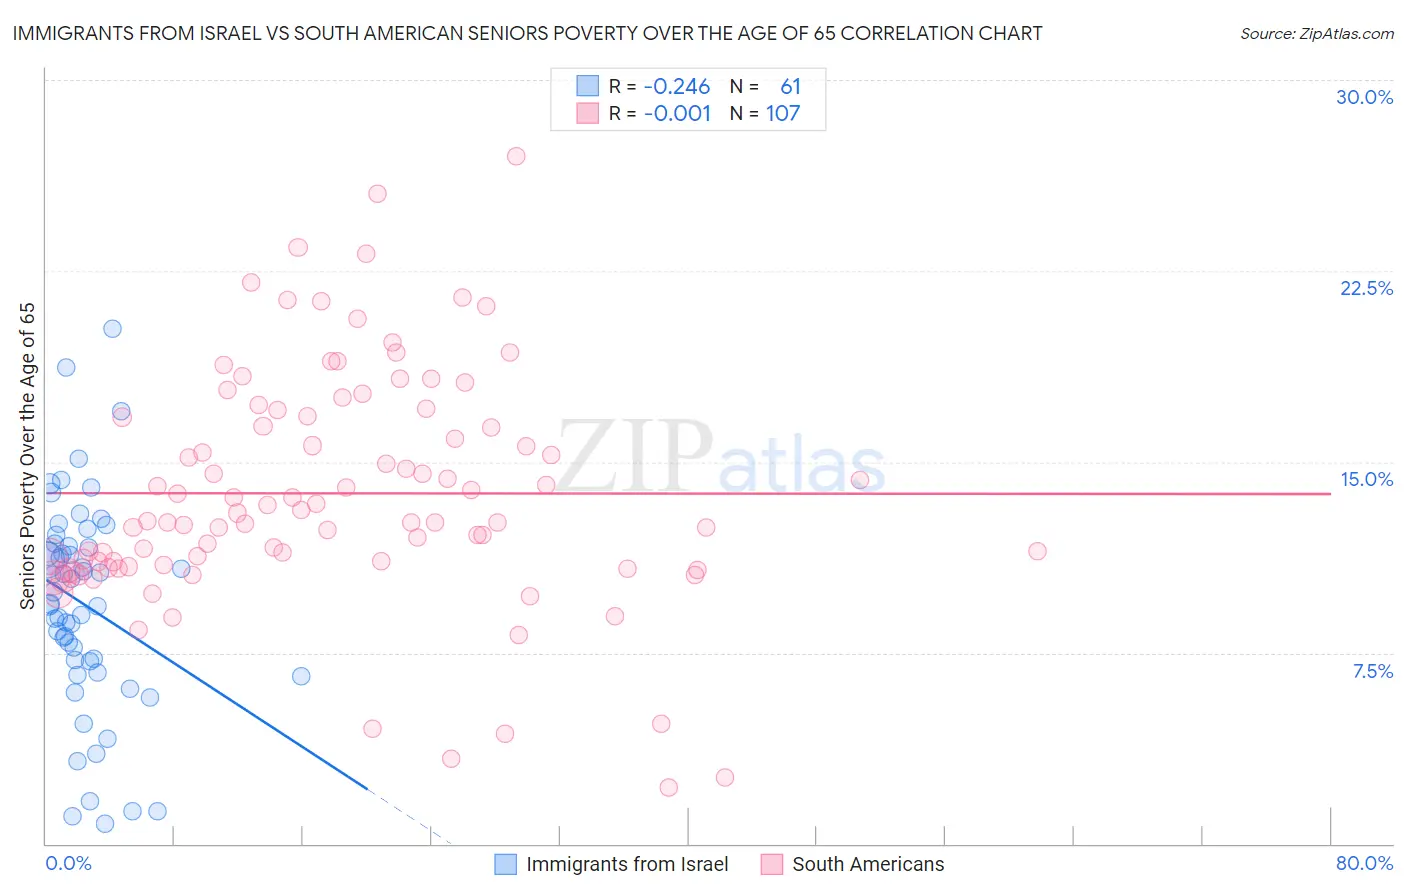 Immigrants from Israel vs South American Seniors Poverty Over the Age of 65